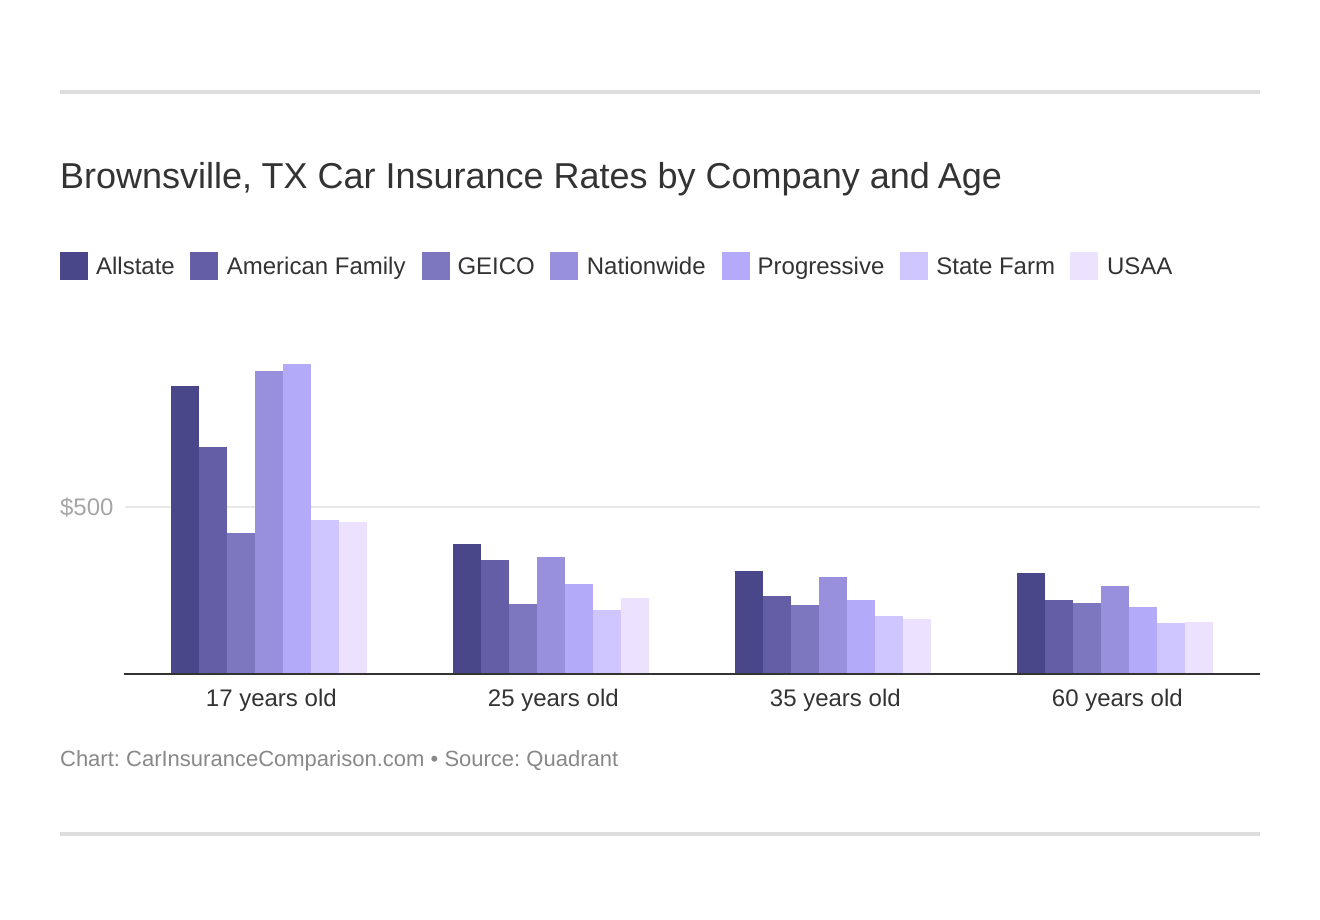 Brownsville, TX Car Insurance Rates by Company and Age